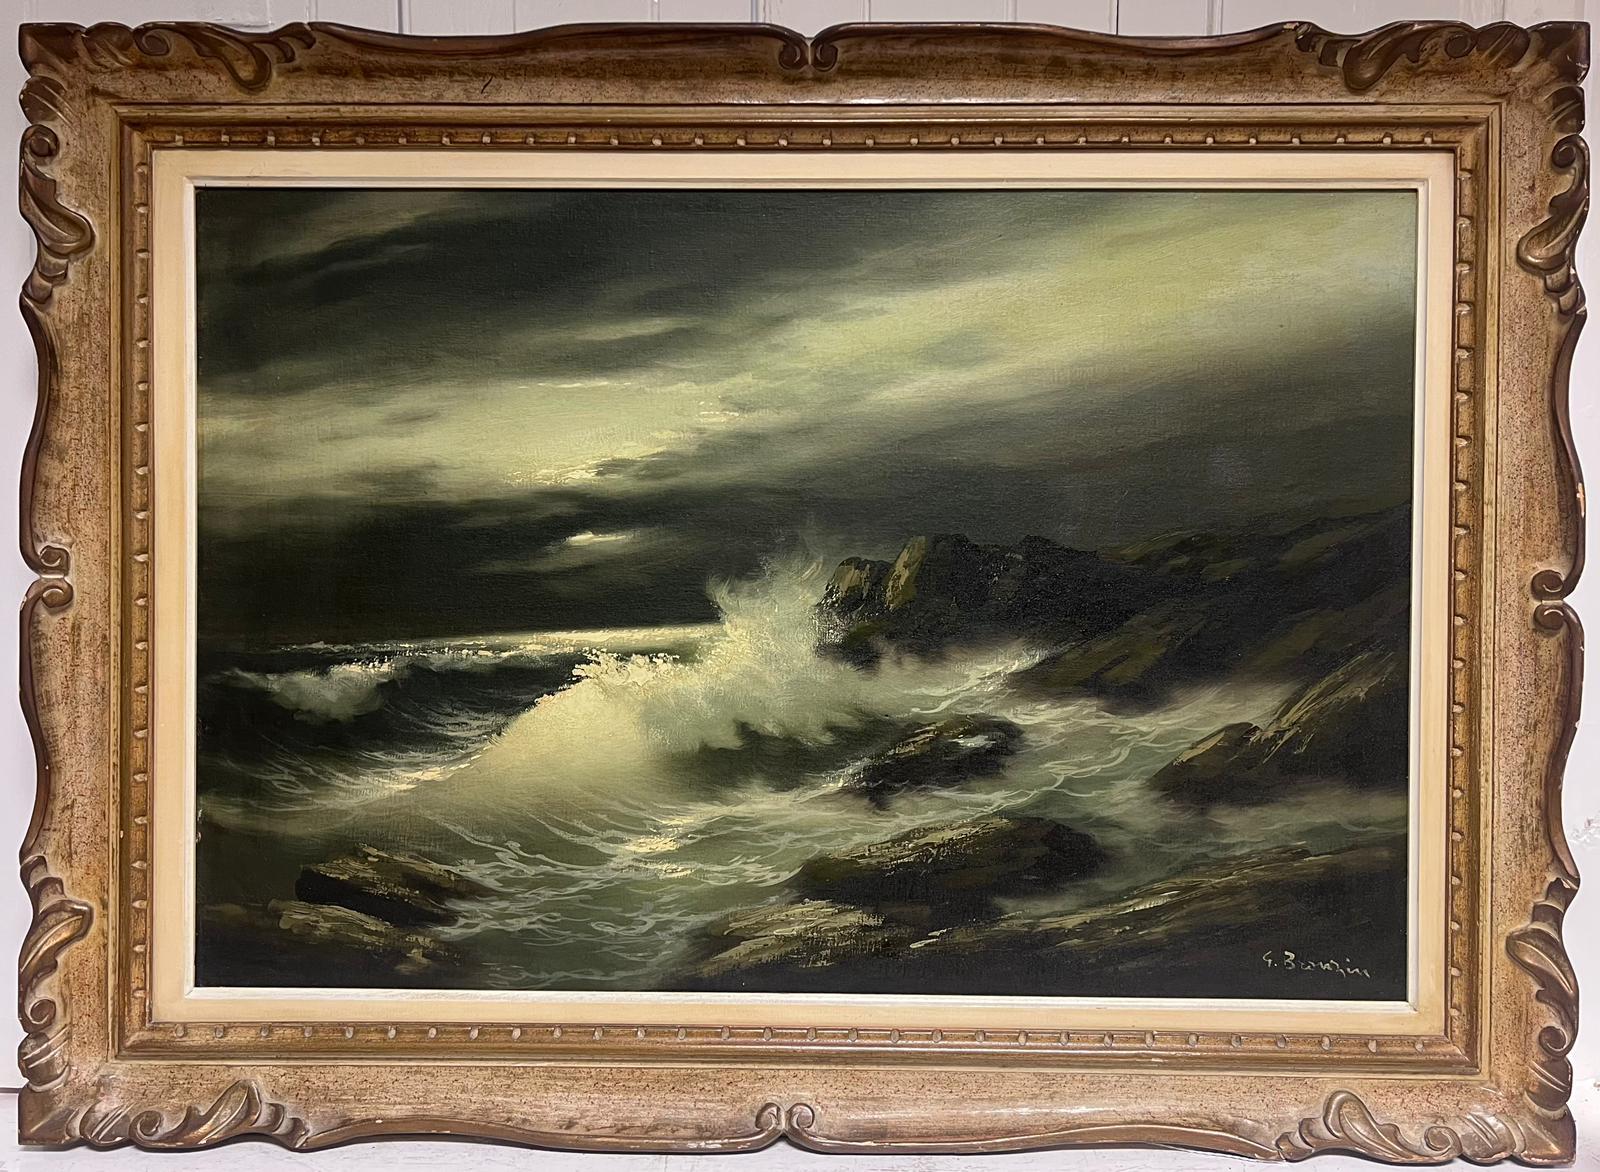 Crashing Waves under Moonlit Sky
Italian School, indistinctly signed 
20th century oil on board, framed
framed: 32 x 44 inches
painting: 24 x 34 inches
provenance: private collection, London
condition: very good and sound condition